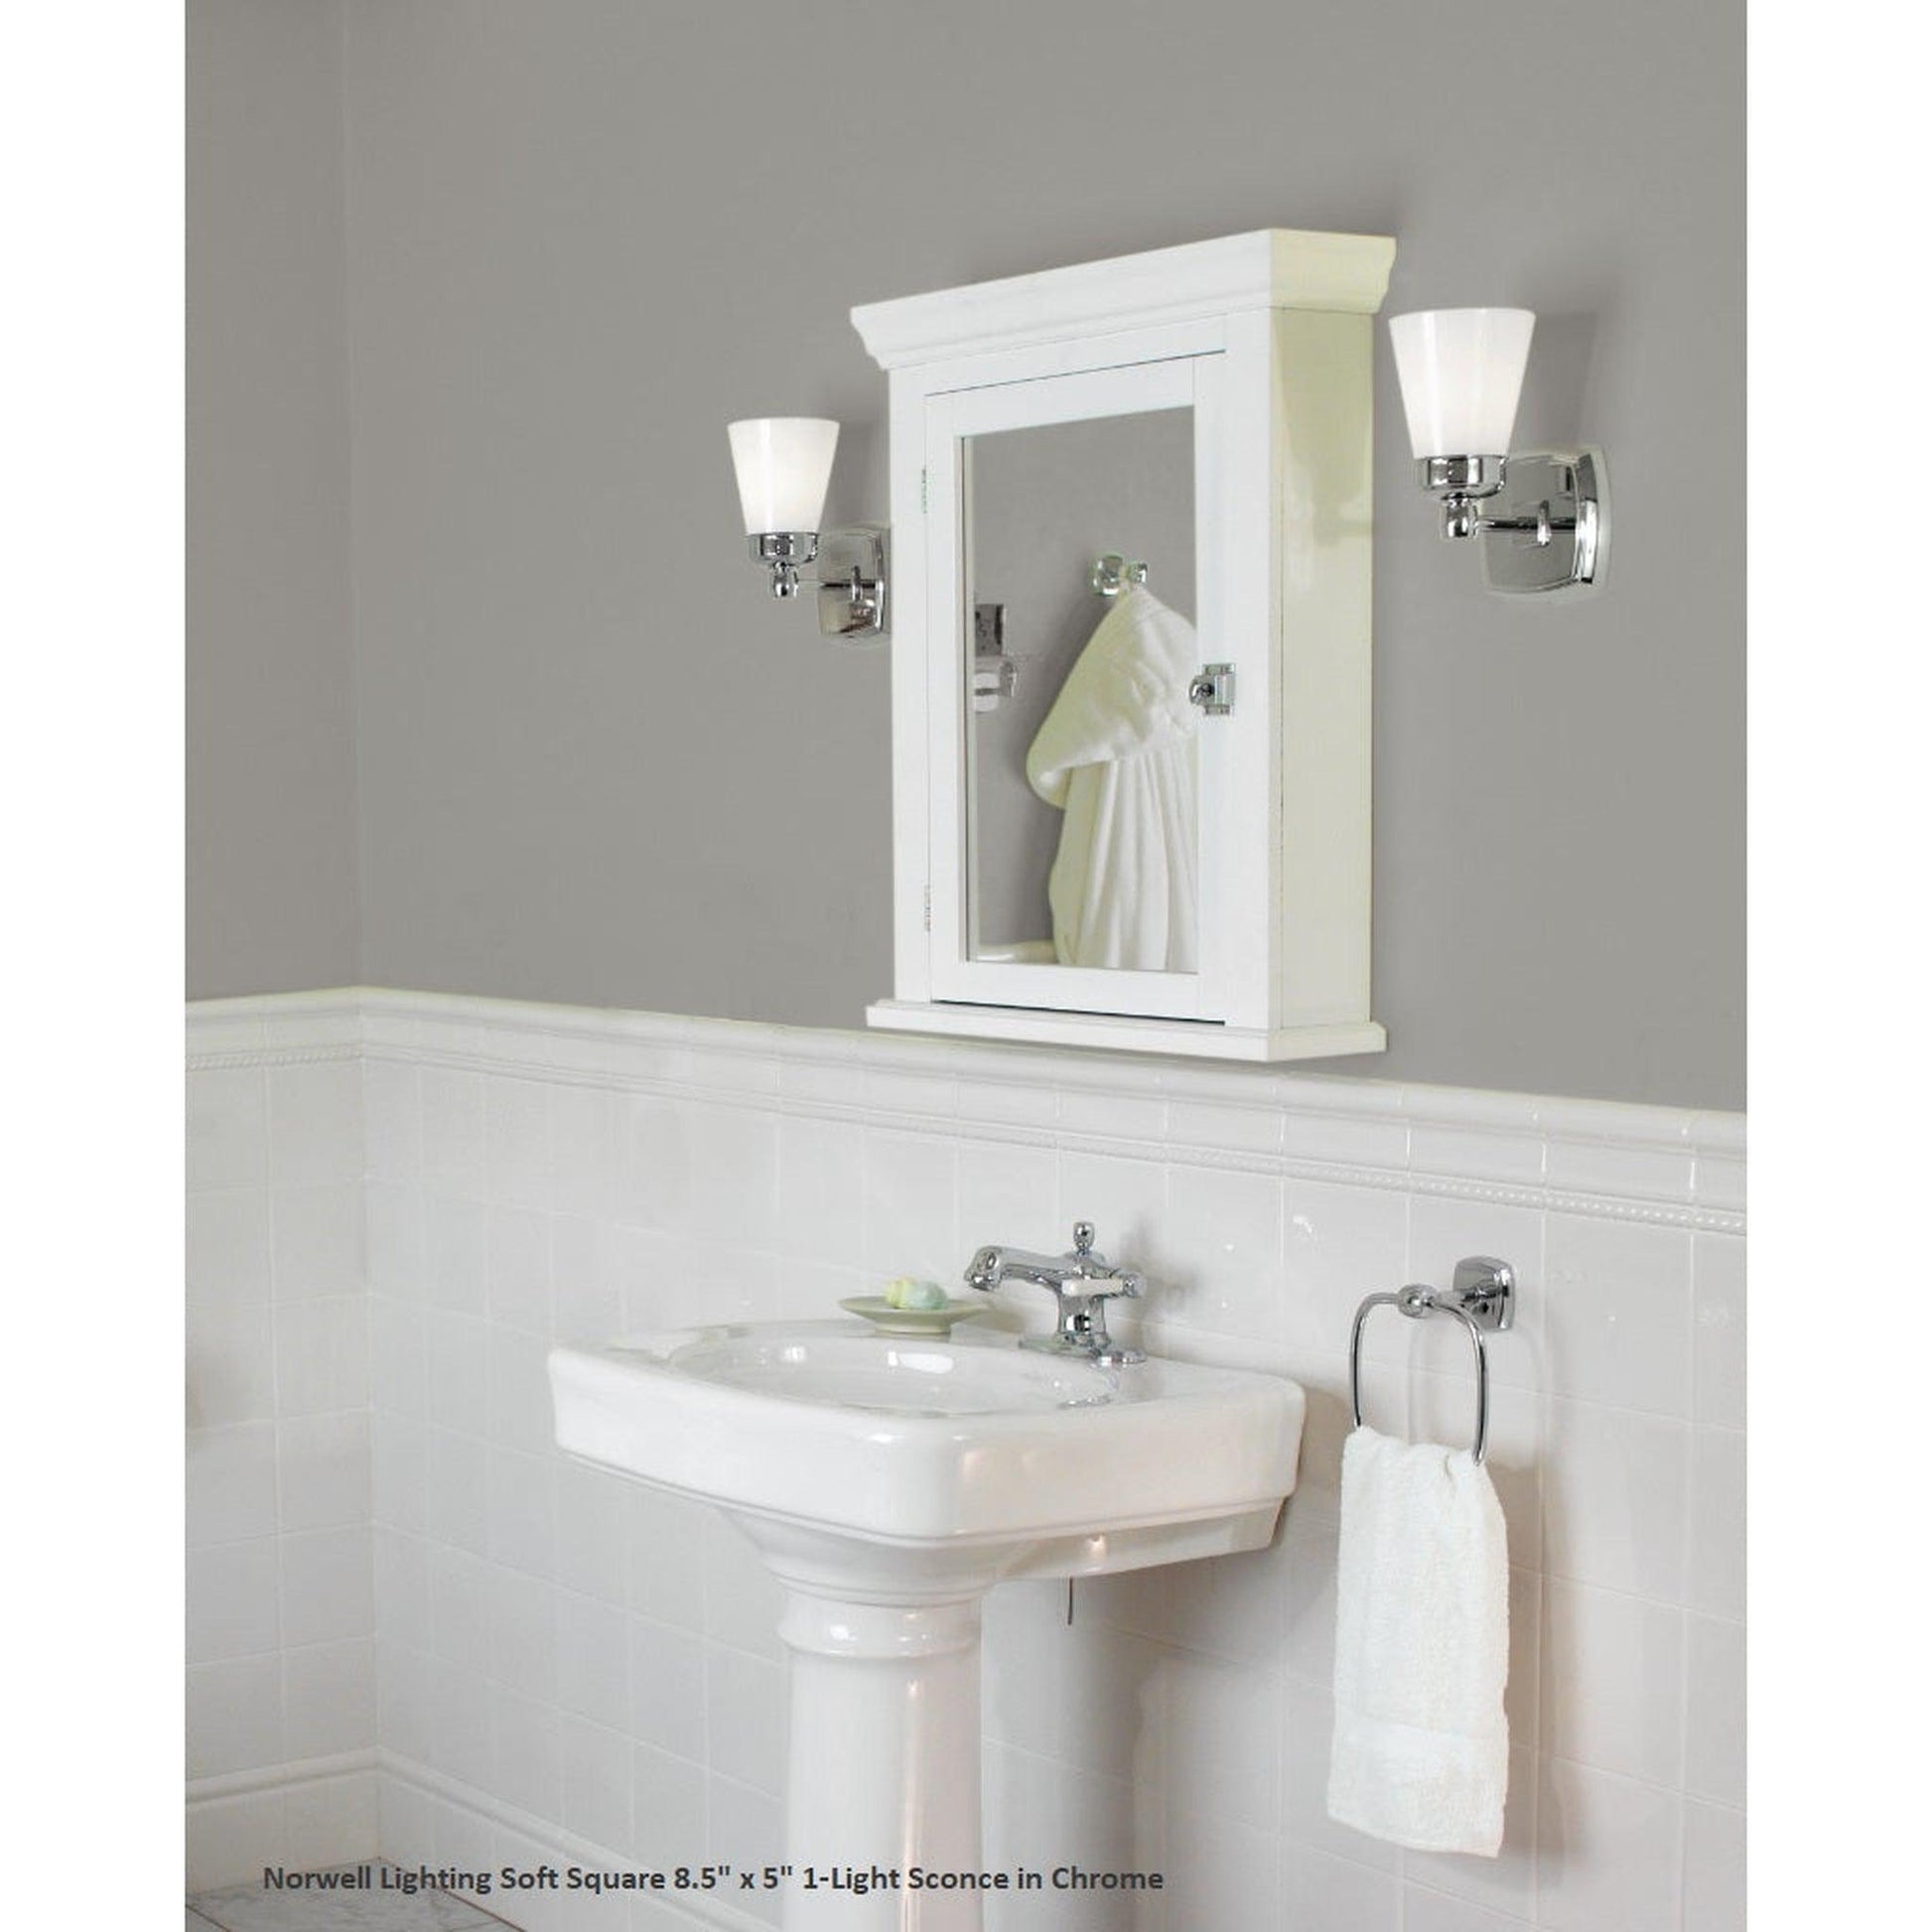 Norwell Lighting Soft Square 9" x 5" 1-Light Sconce Brushed Nickel Vanity Light With Shiny Opal Glass Diffuser